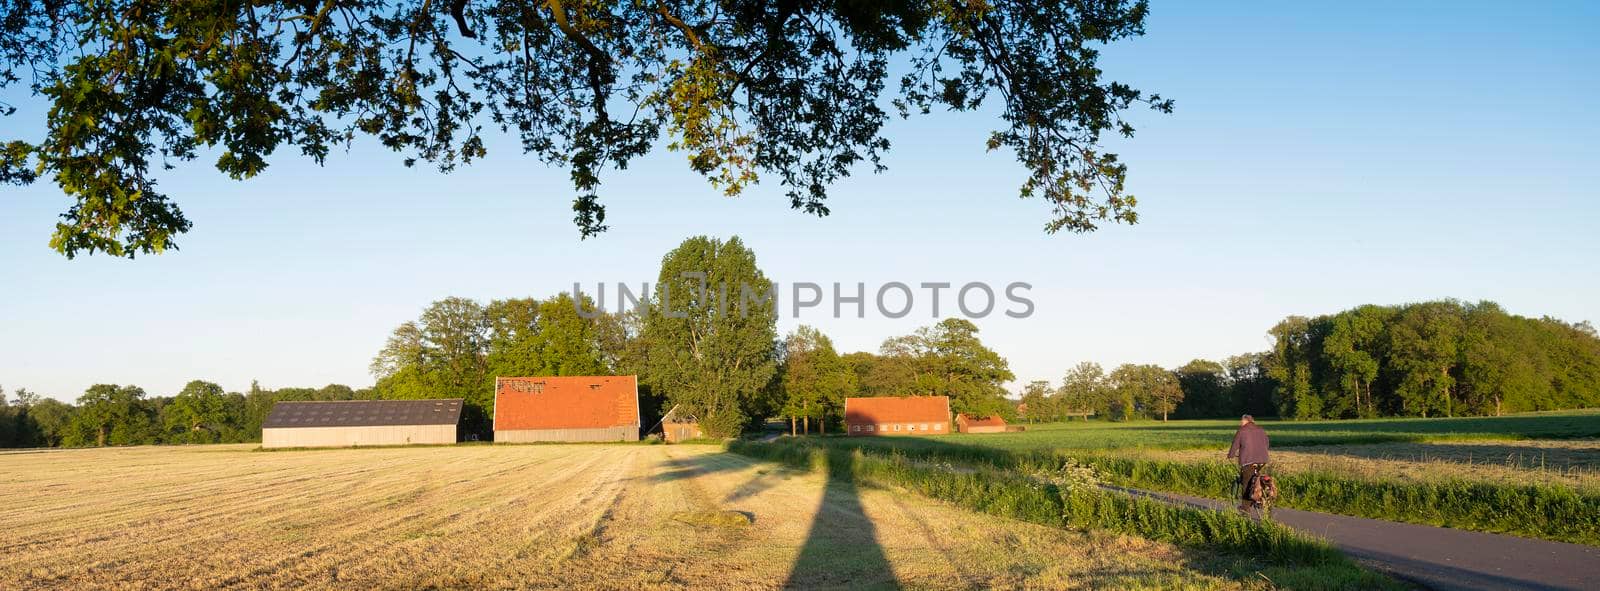 man on bicycle near old barns and farm at sunset in rural area of twente near oldenzaal in holland by ahavelaar